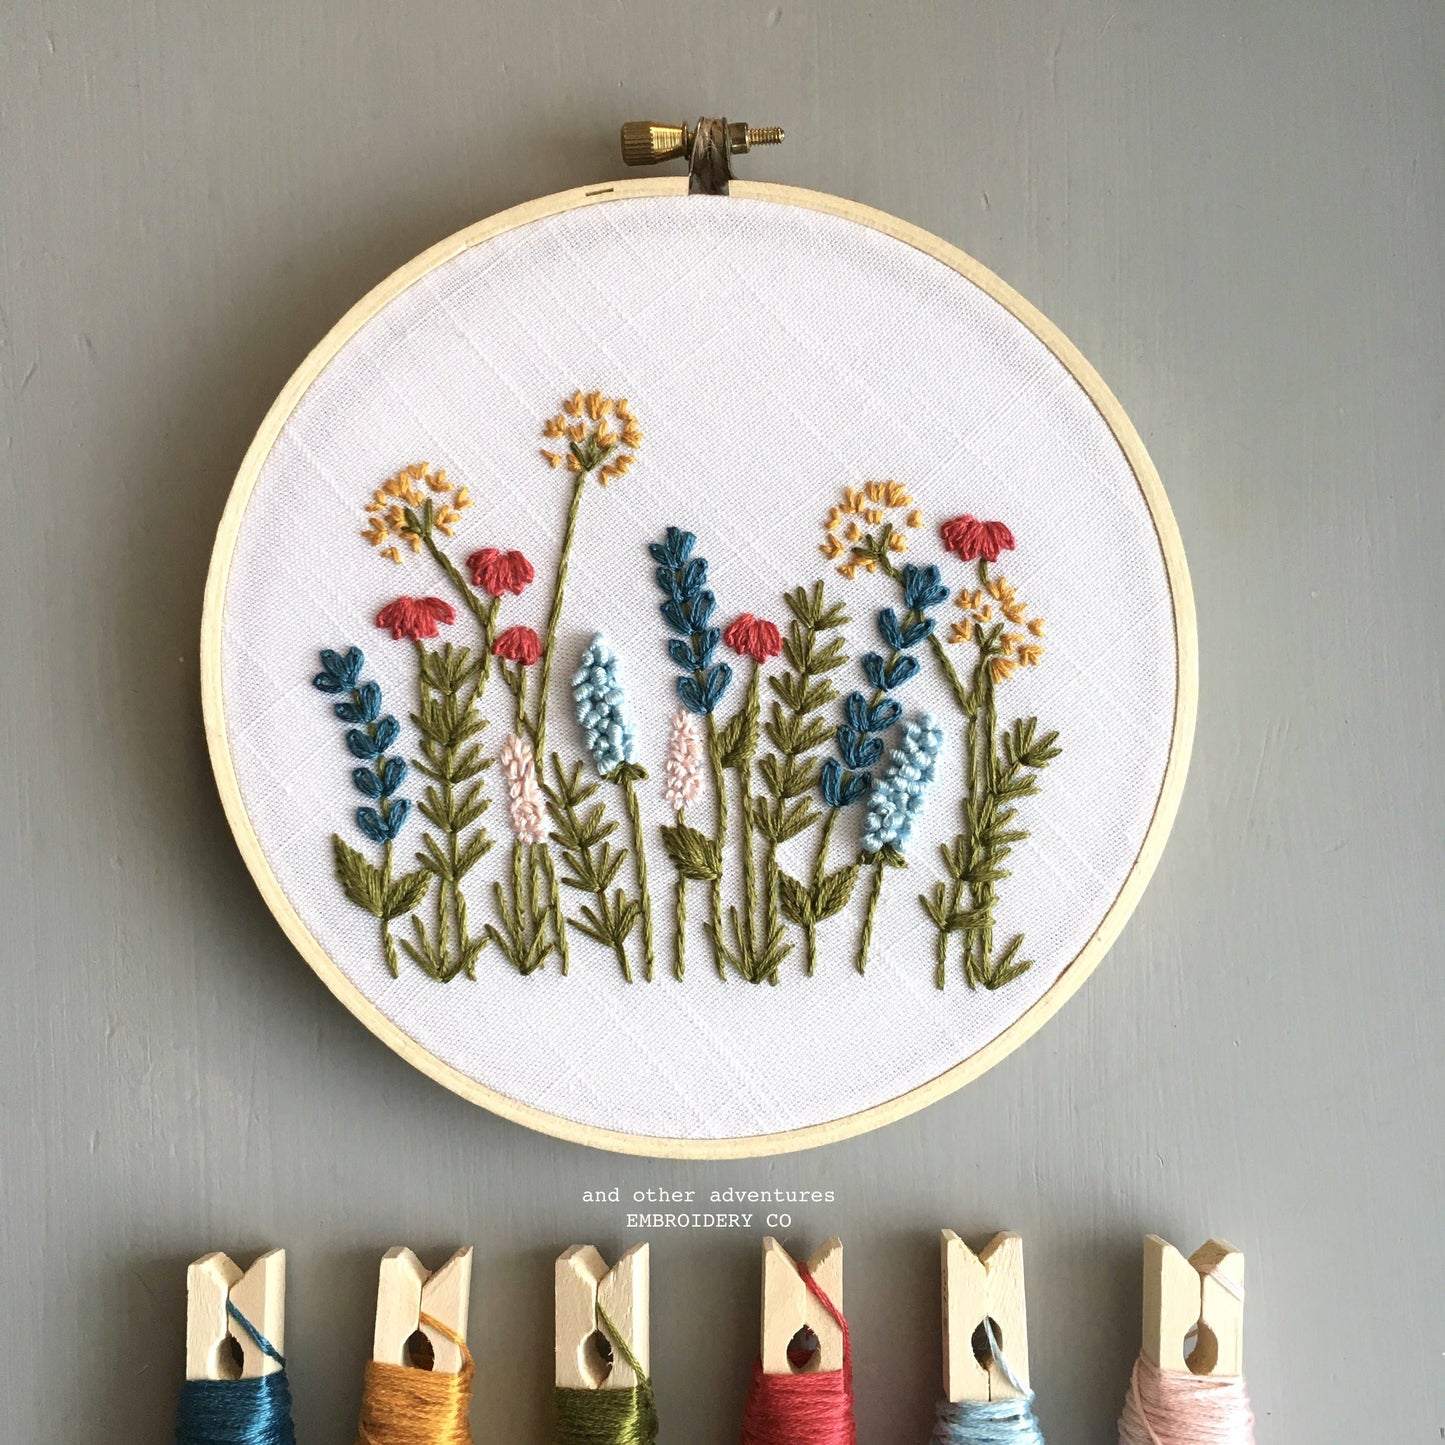 Beginner Embroidery KIT - Bright Summer Meadow